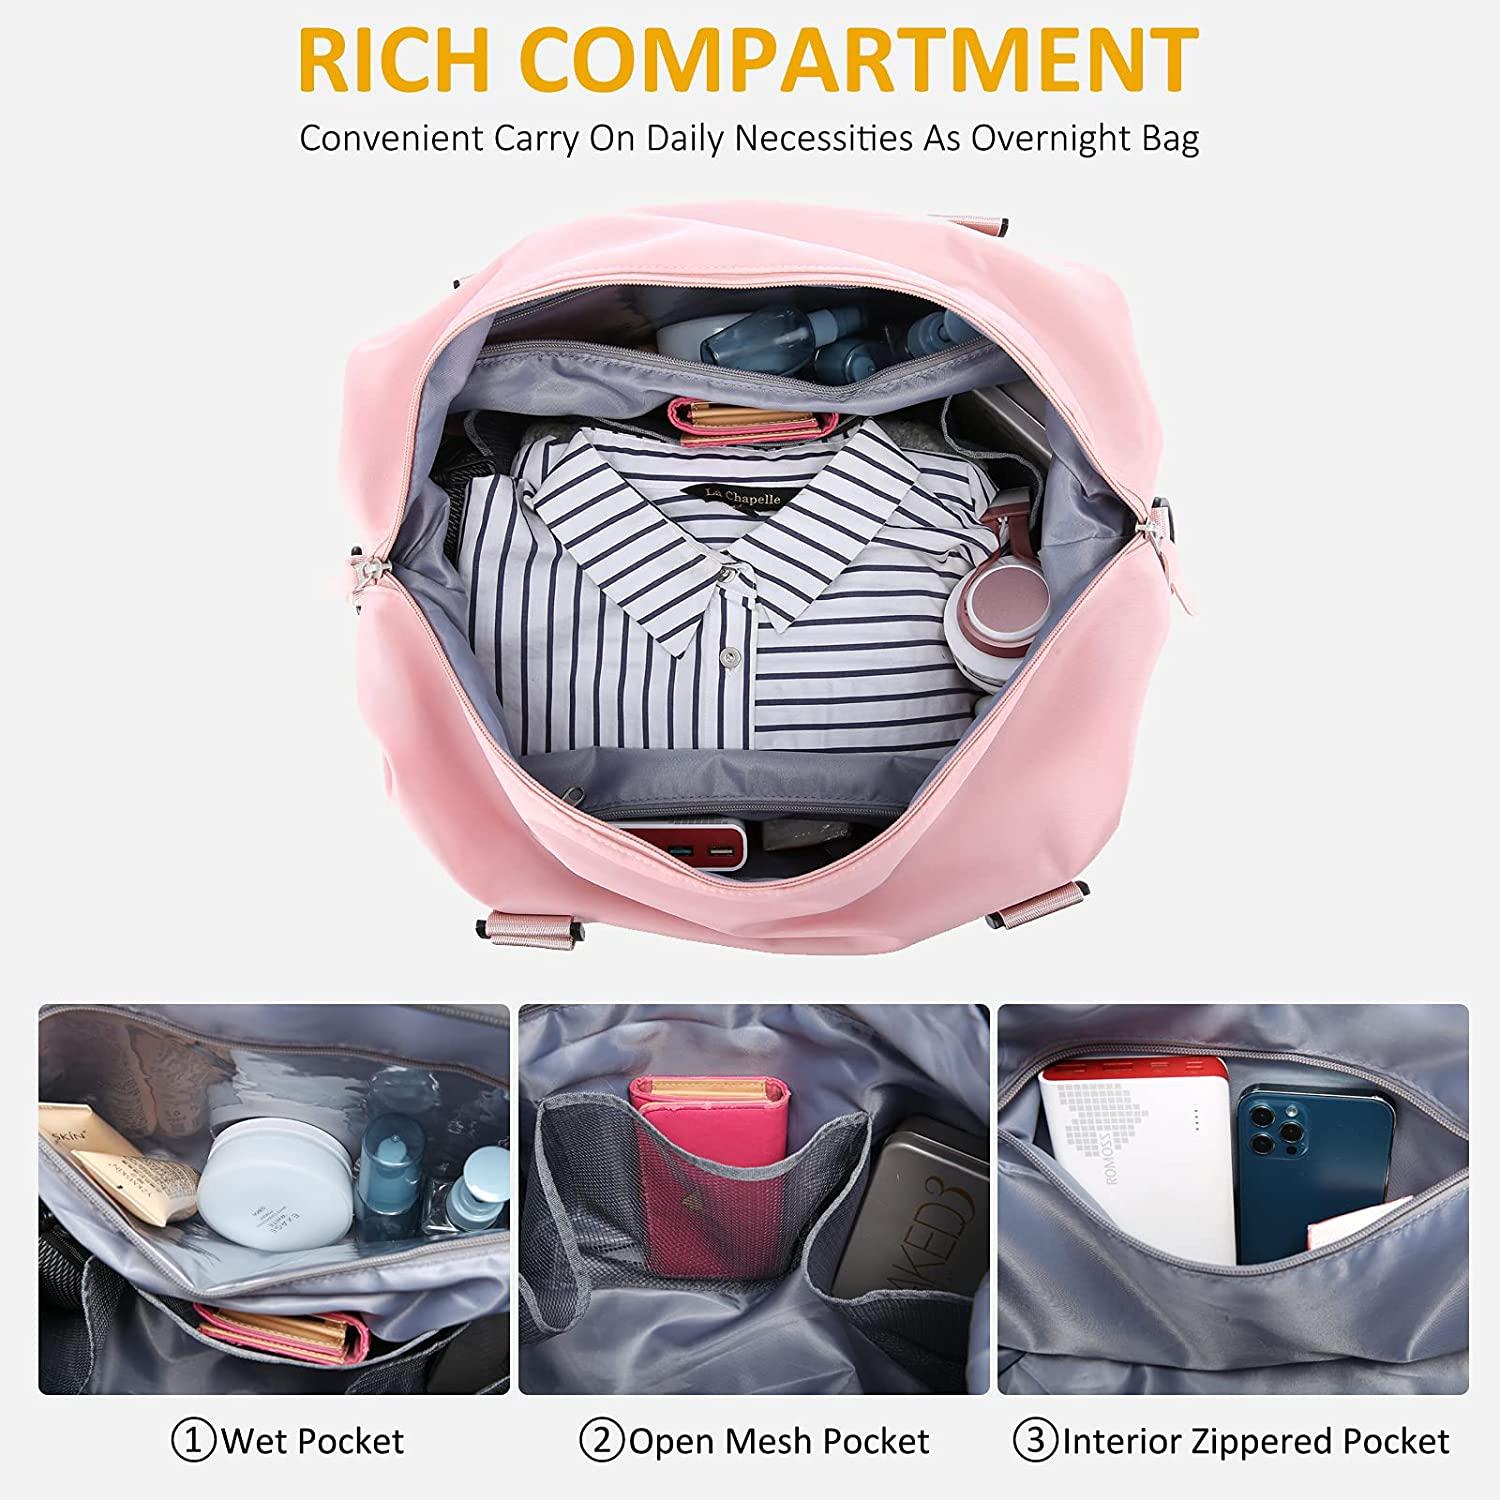 Tracebbg 50L Cute Duffle Bag Women Travel - Weekender Bag for Women Travel  - Hospital Bag for Labor and Delivery - Overnight Bag with Shoe